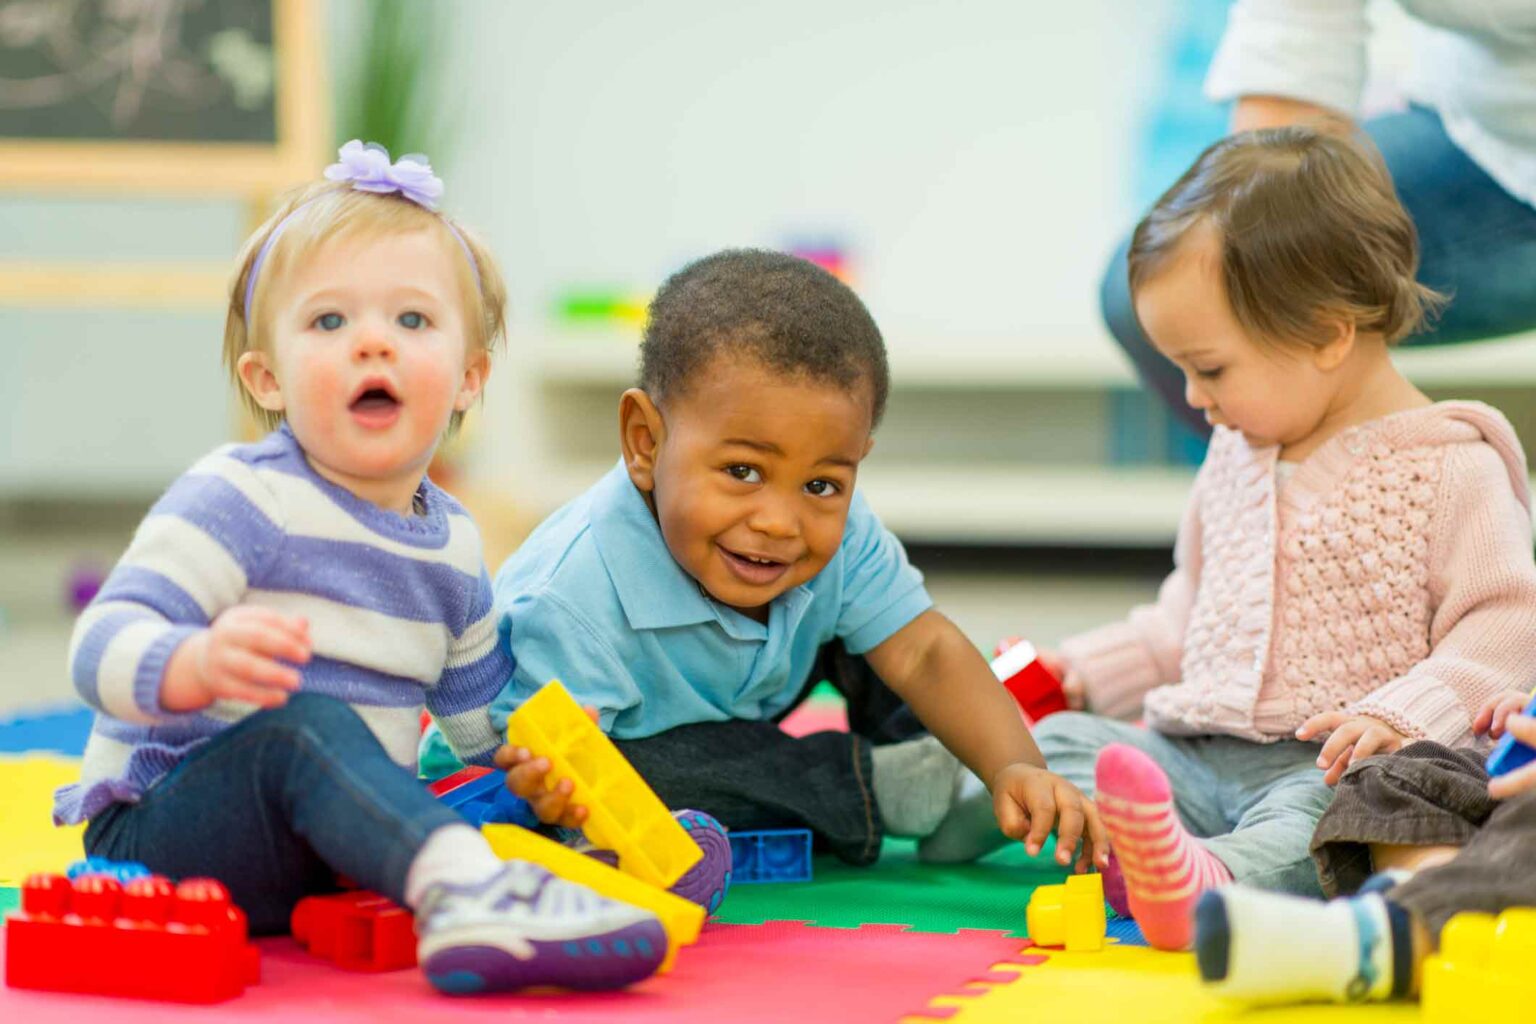 Activities For Infants In Daycare 1536x1024 